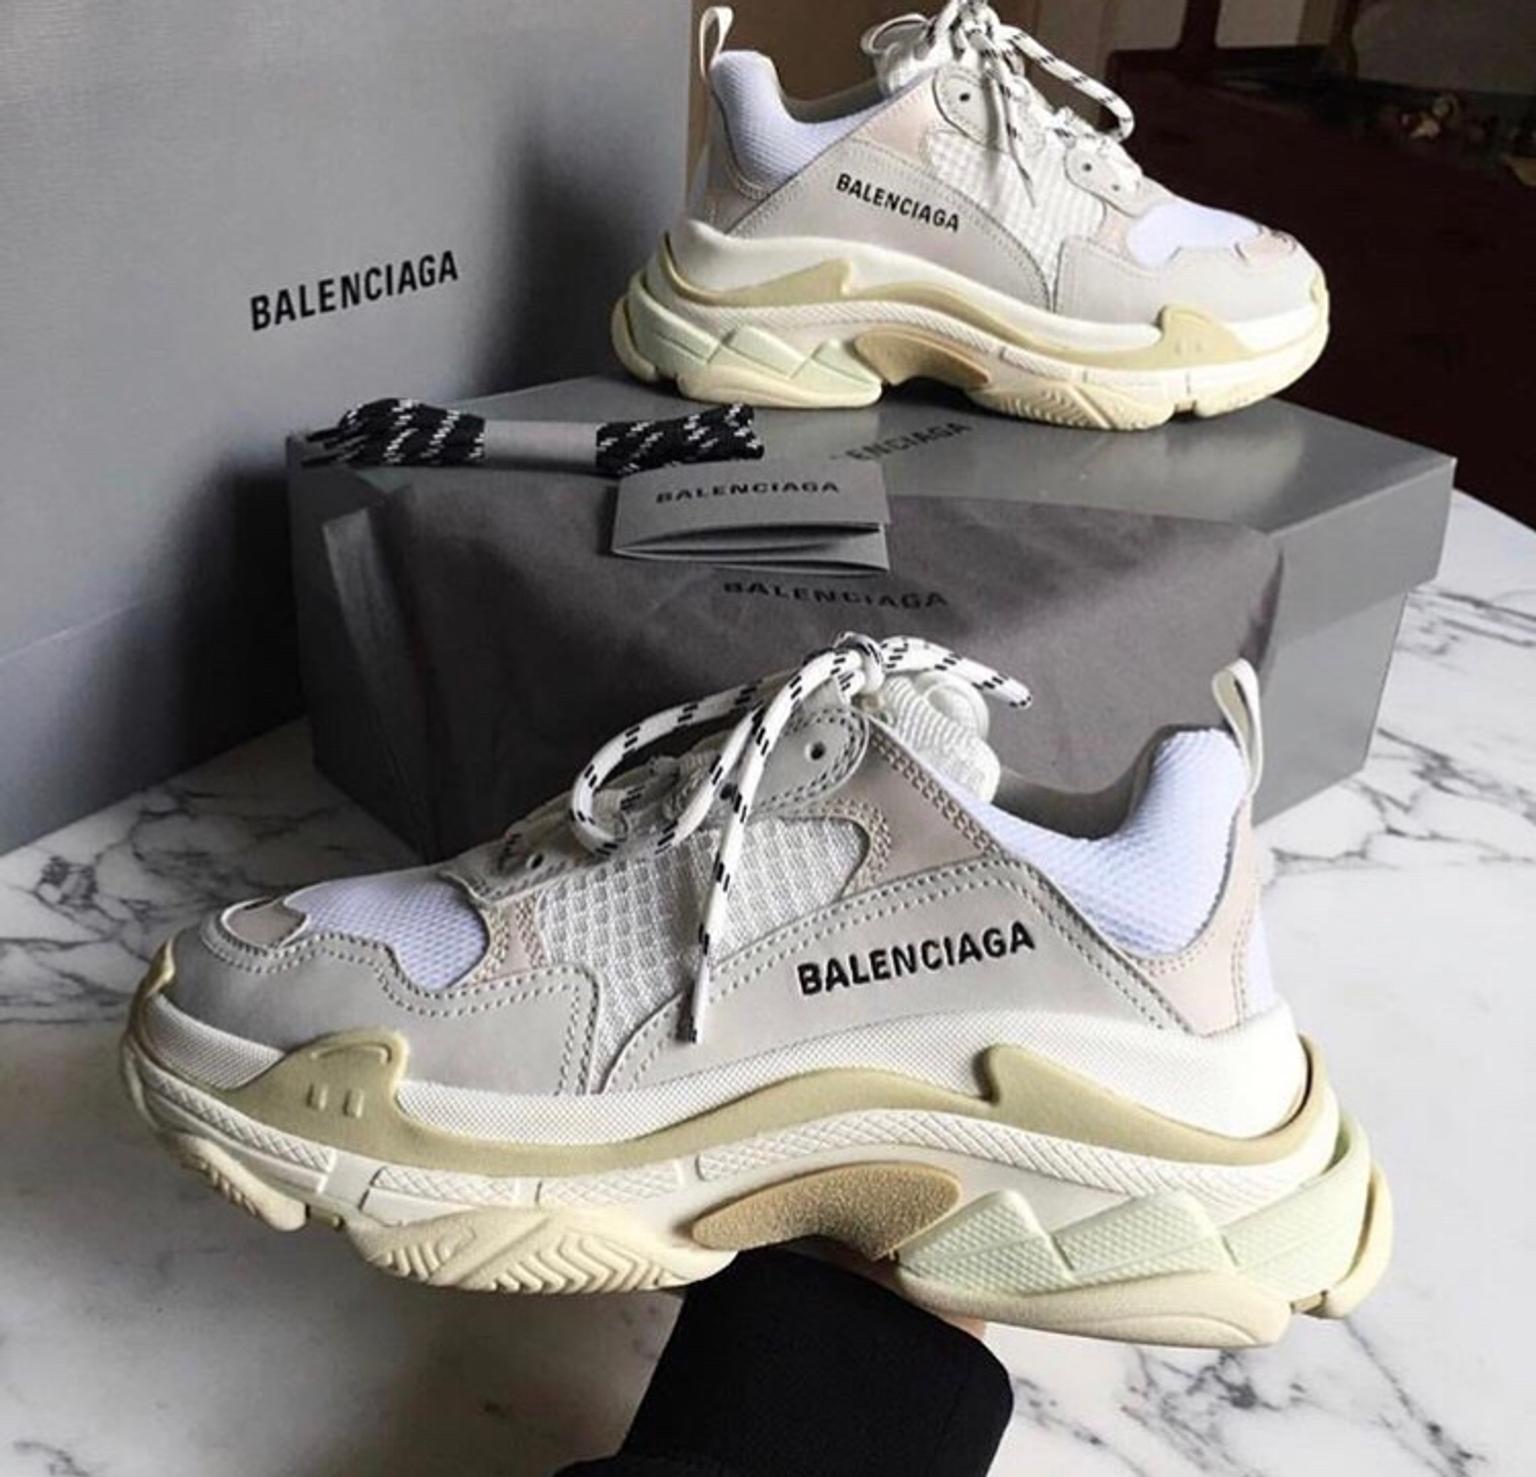 UNBOXiNG REViEW BALENCiAGA TRiPLE S TRAiNER